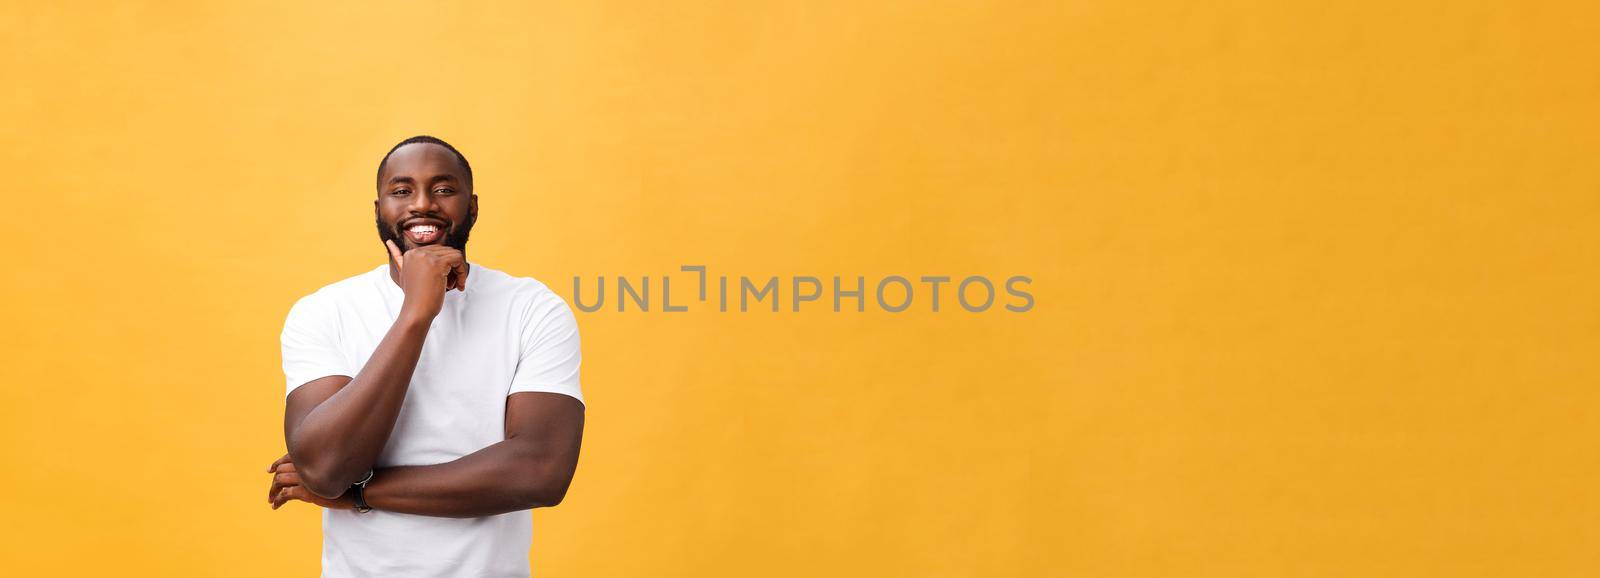 Portrait of a modern young black man smiling with arms crossed on isolated yellow background.